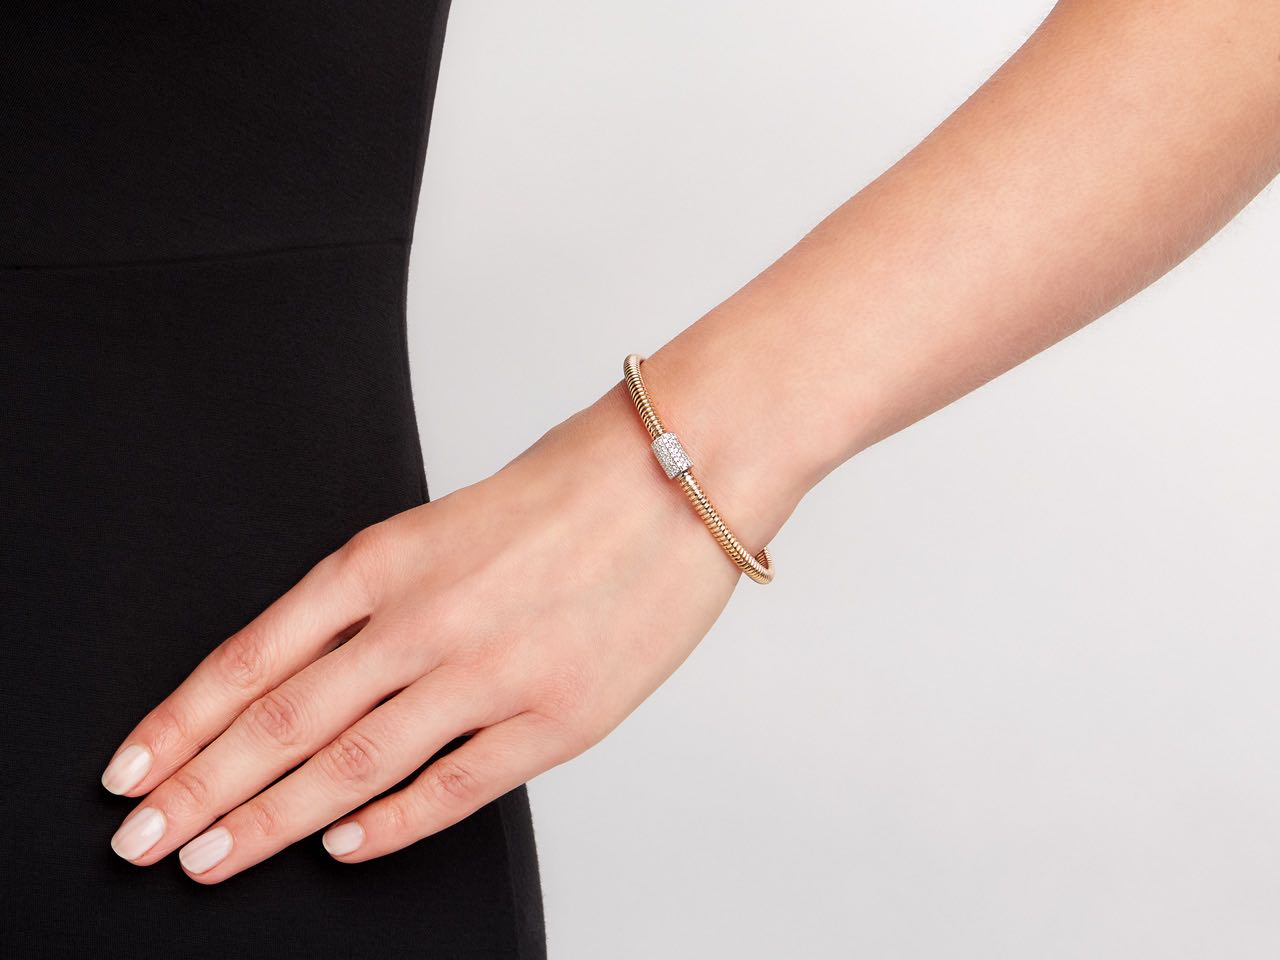 Thin Tubogas Bracelet with Diamond Clasp, in 18K Rose Gold, by Beladora